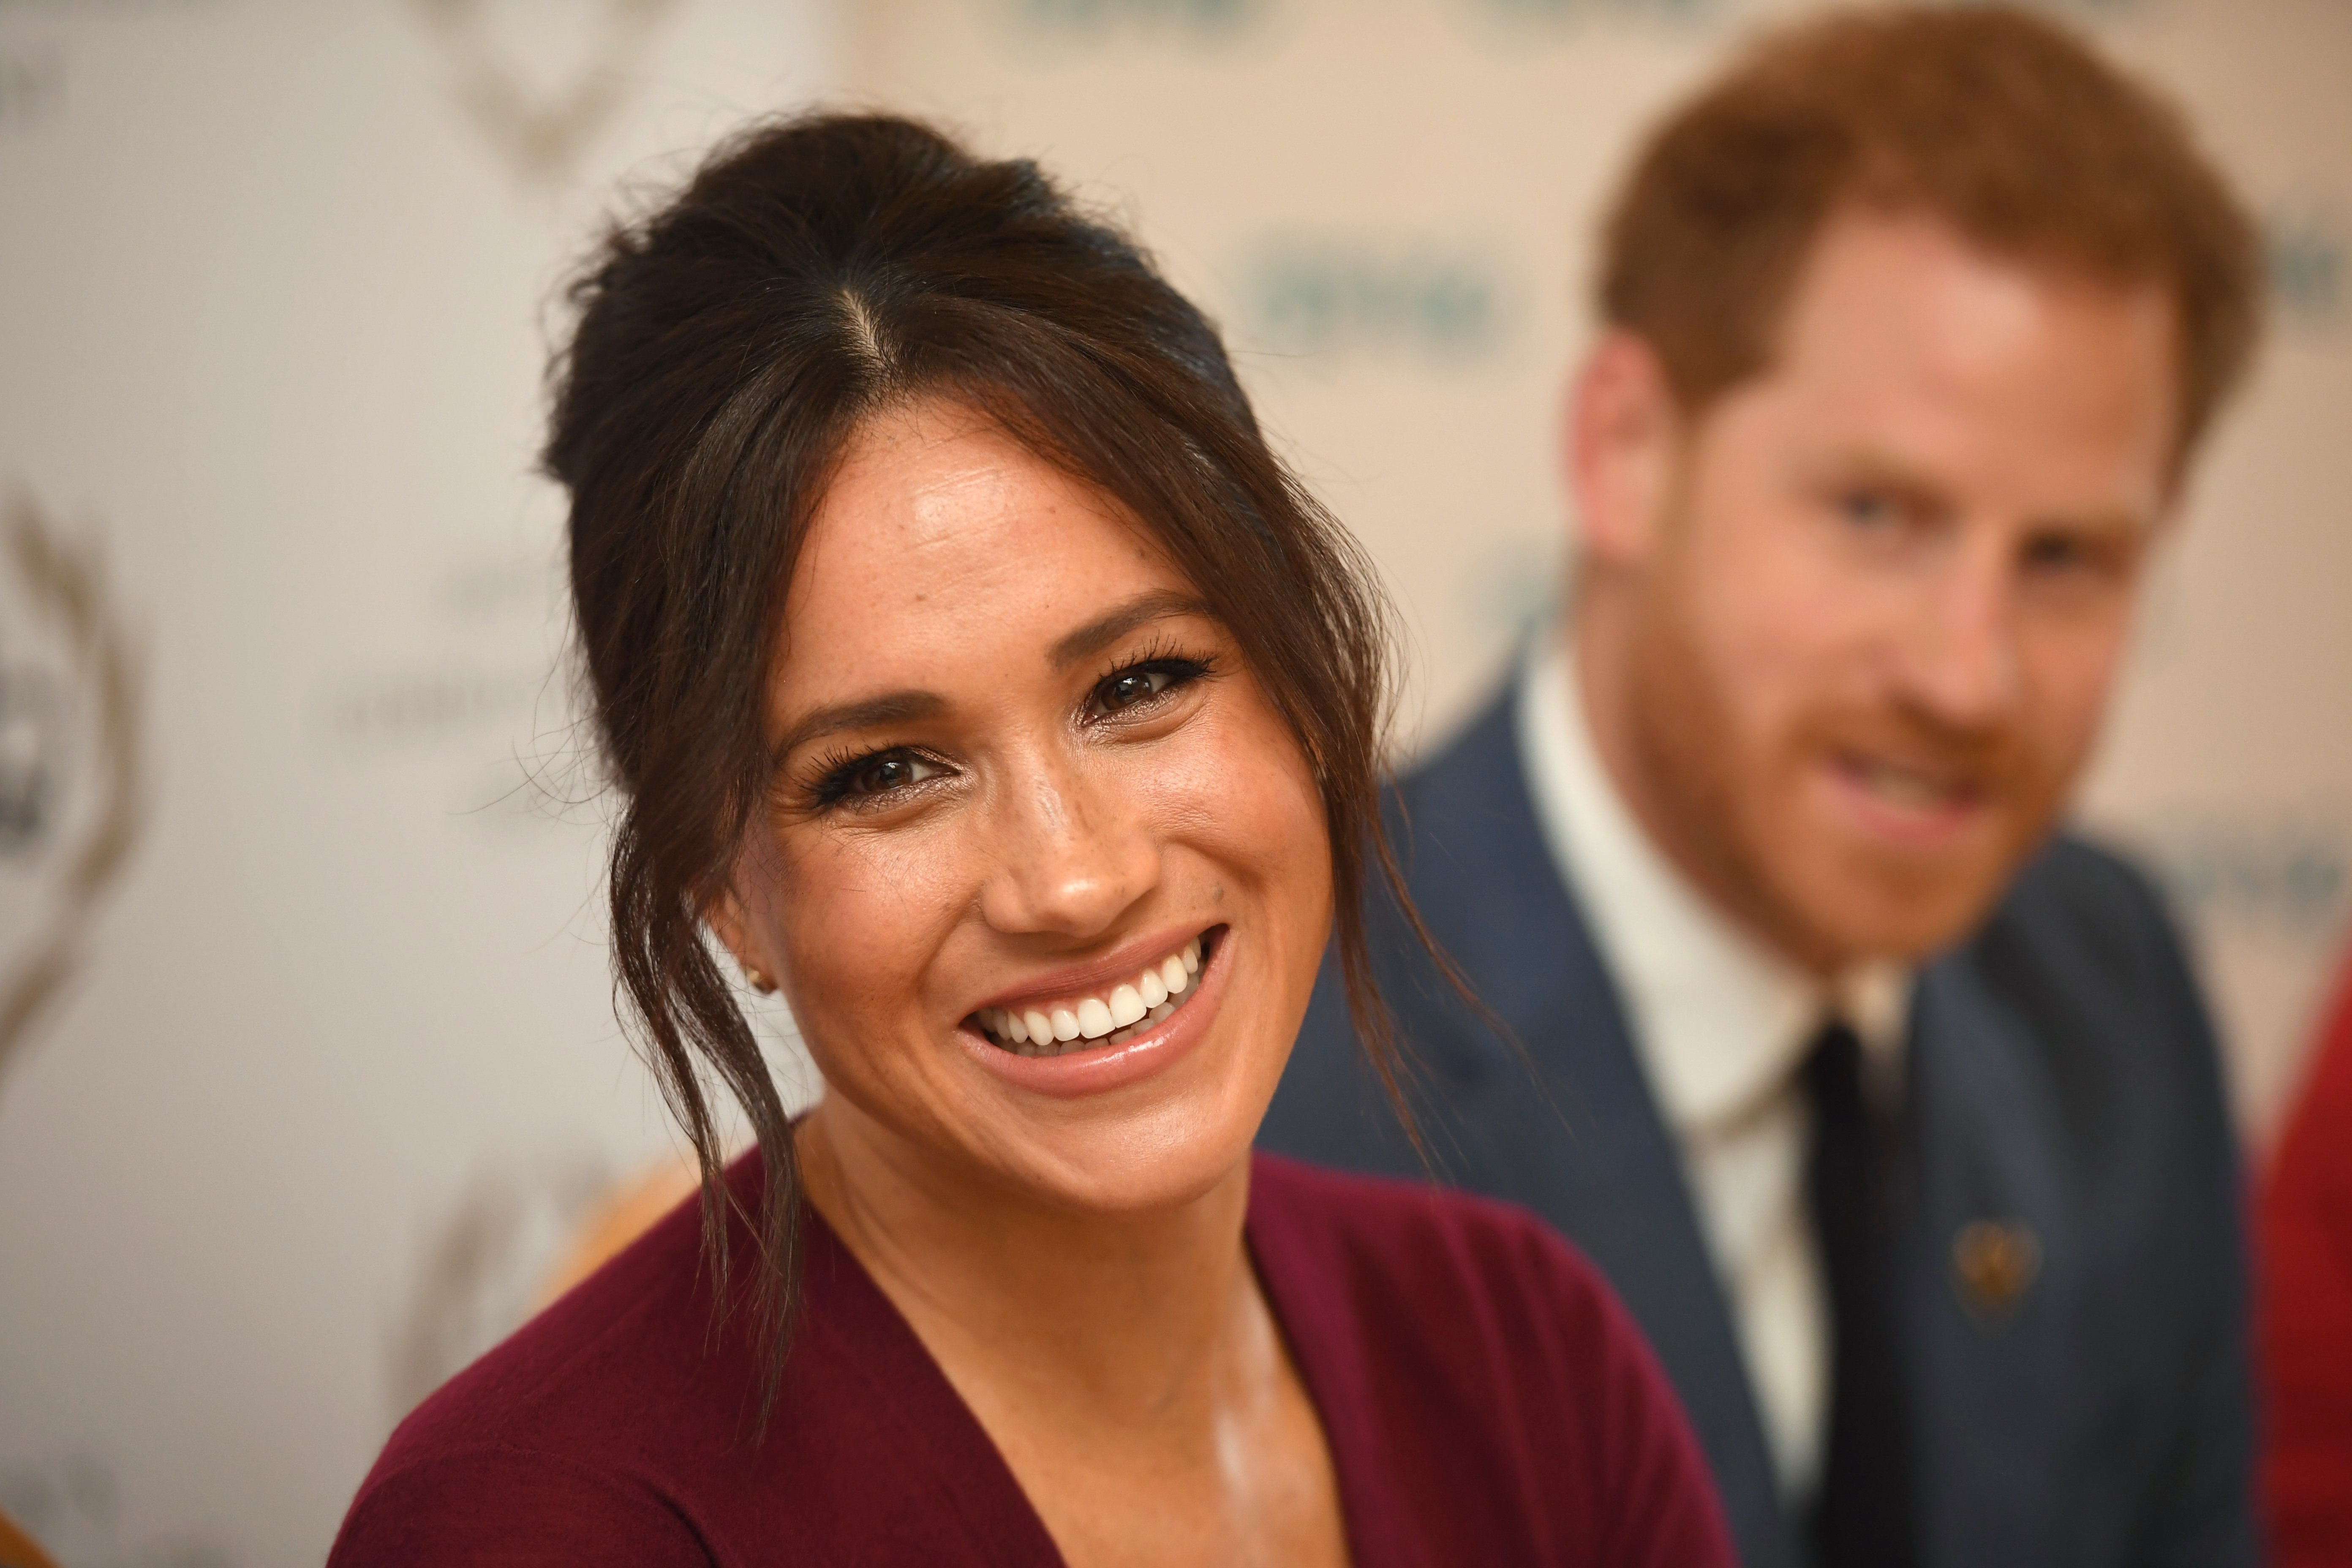 Meghan Markle and Prince Harry attend a discussion on gender equality in Windsor, England on October 25, 2019 | Photo: Getty Images